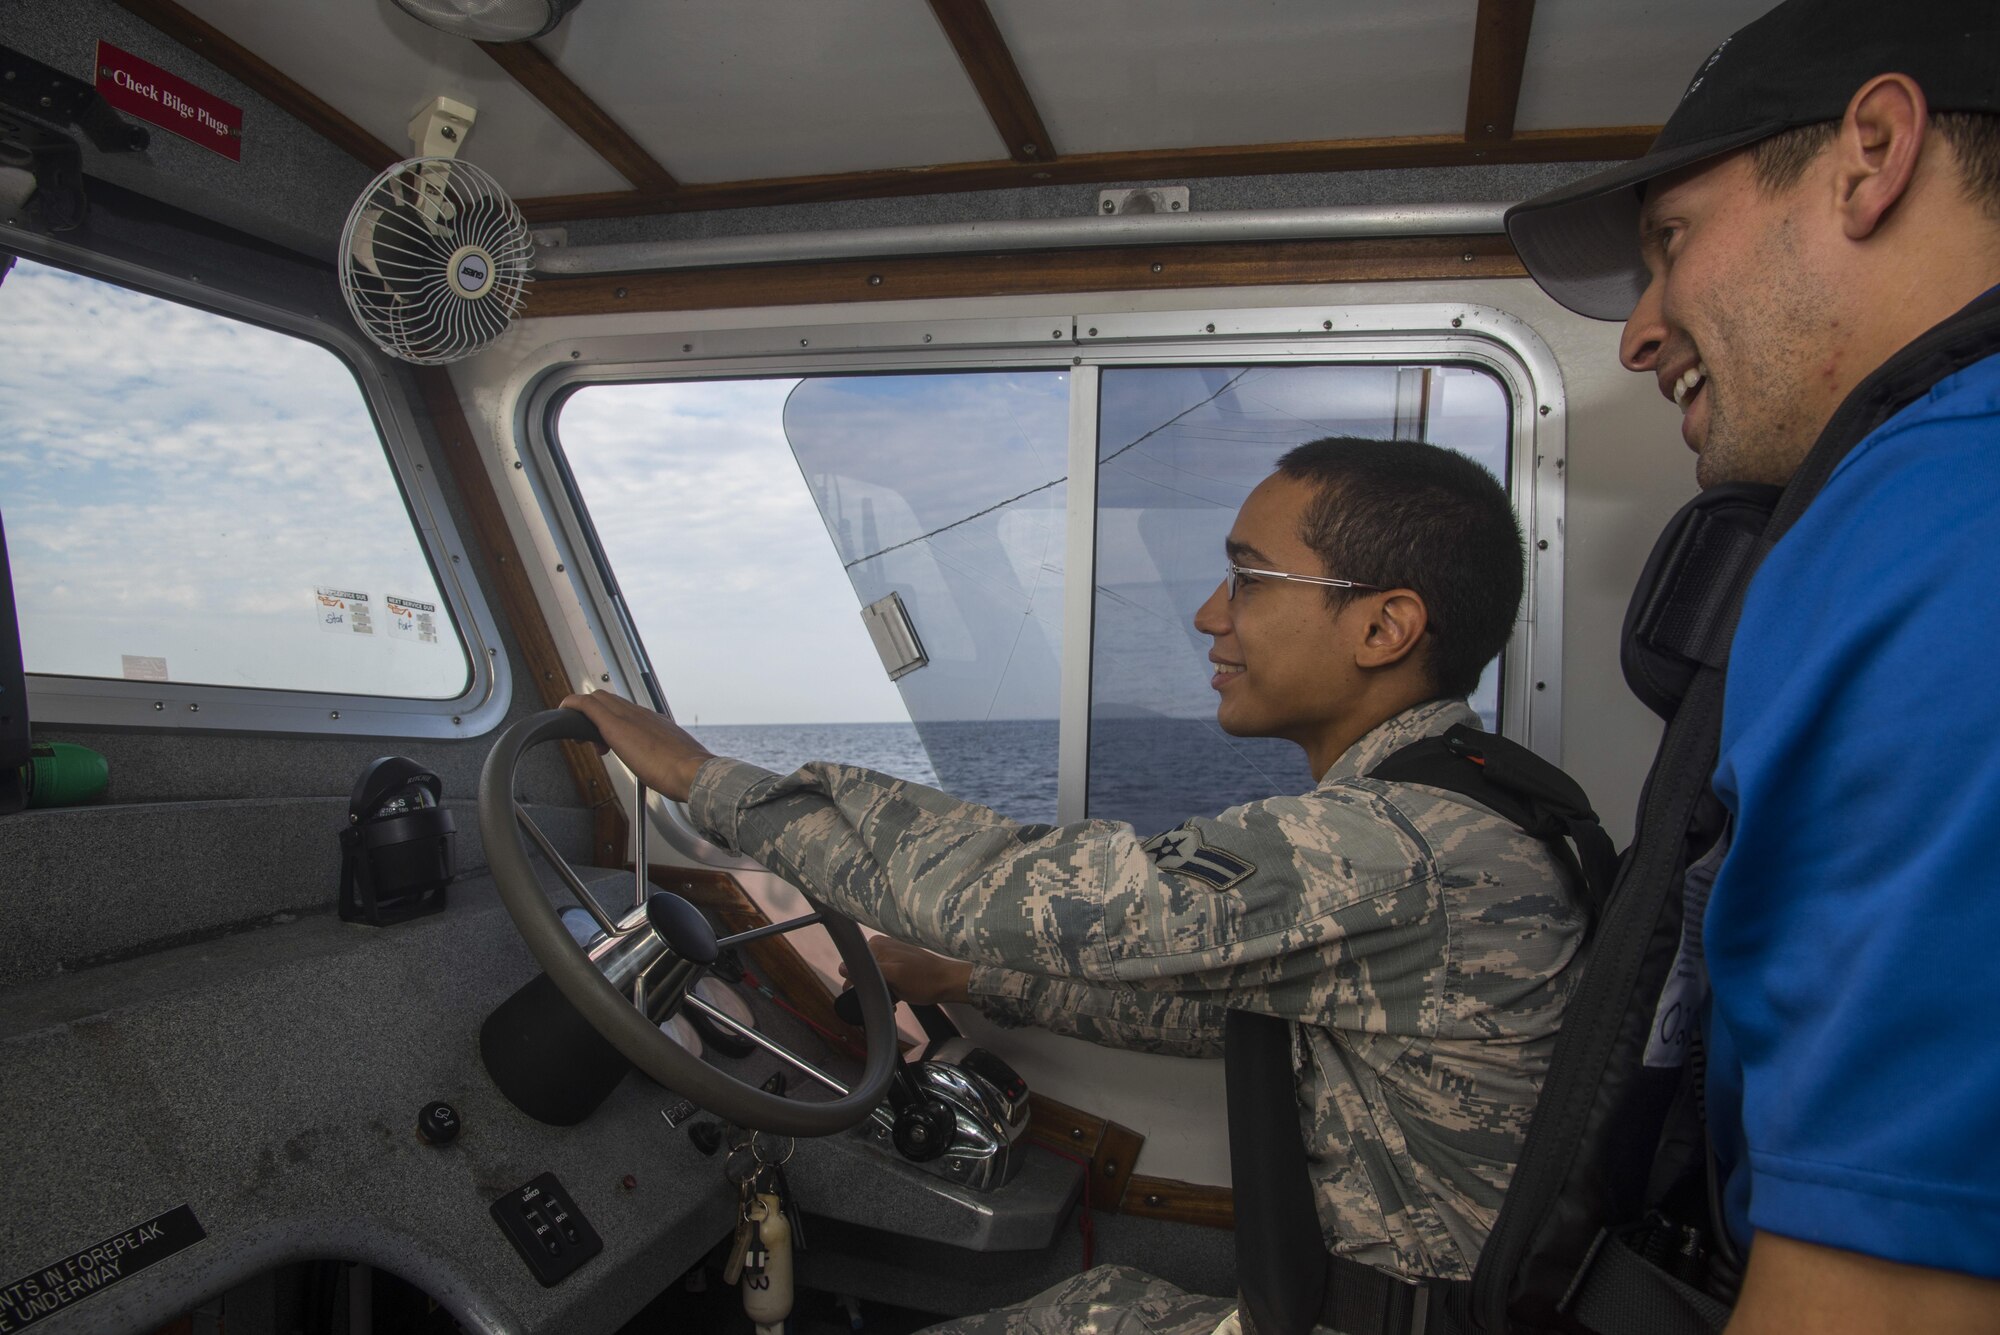 U.S. Air Force Staff Sgt. Kevin Gonzalez, a marine patrol crew lead assigned to the 6th Security Forces Squadron, right, teaches Airman 1st Class Jose Torres, a customer service technician assigned to the 6th Force Support Squadron, how to drive a patrol boat at MacDill Air Force Base, Fla., Sept. 21, 2017.